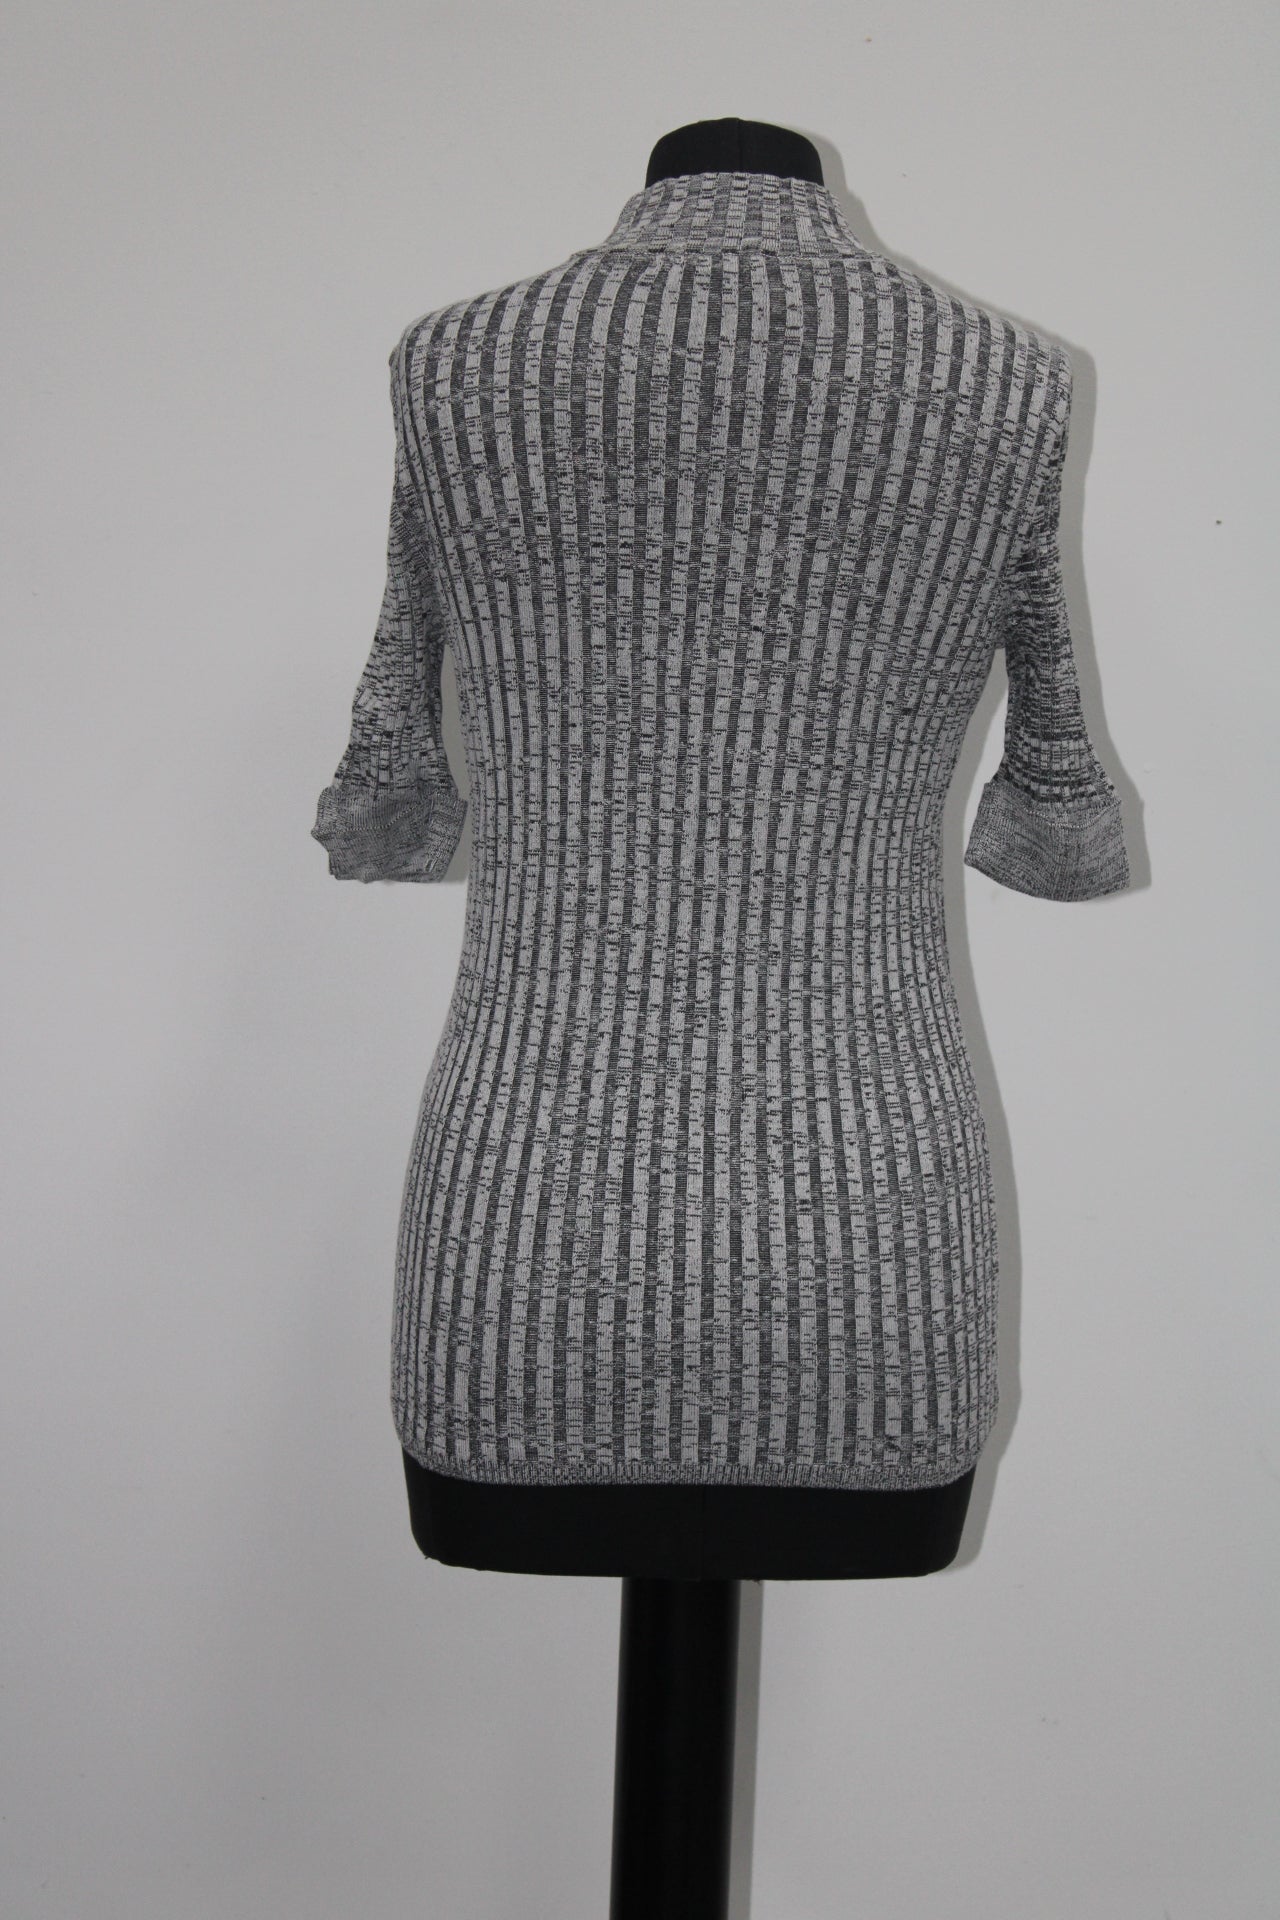 STYLE & CO WOMEN'S MOCK-NECK SWEATER, GREY, PM - NEW WITHOUT TAG 11026